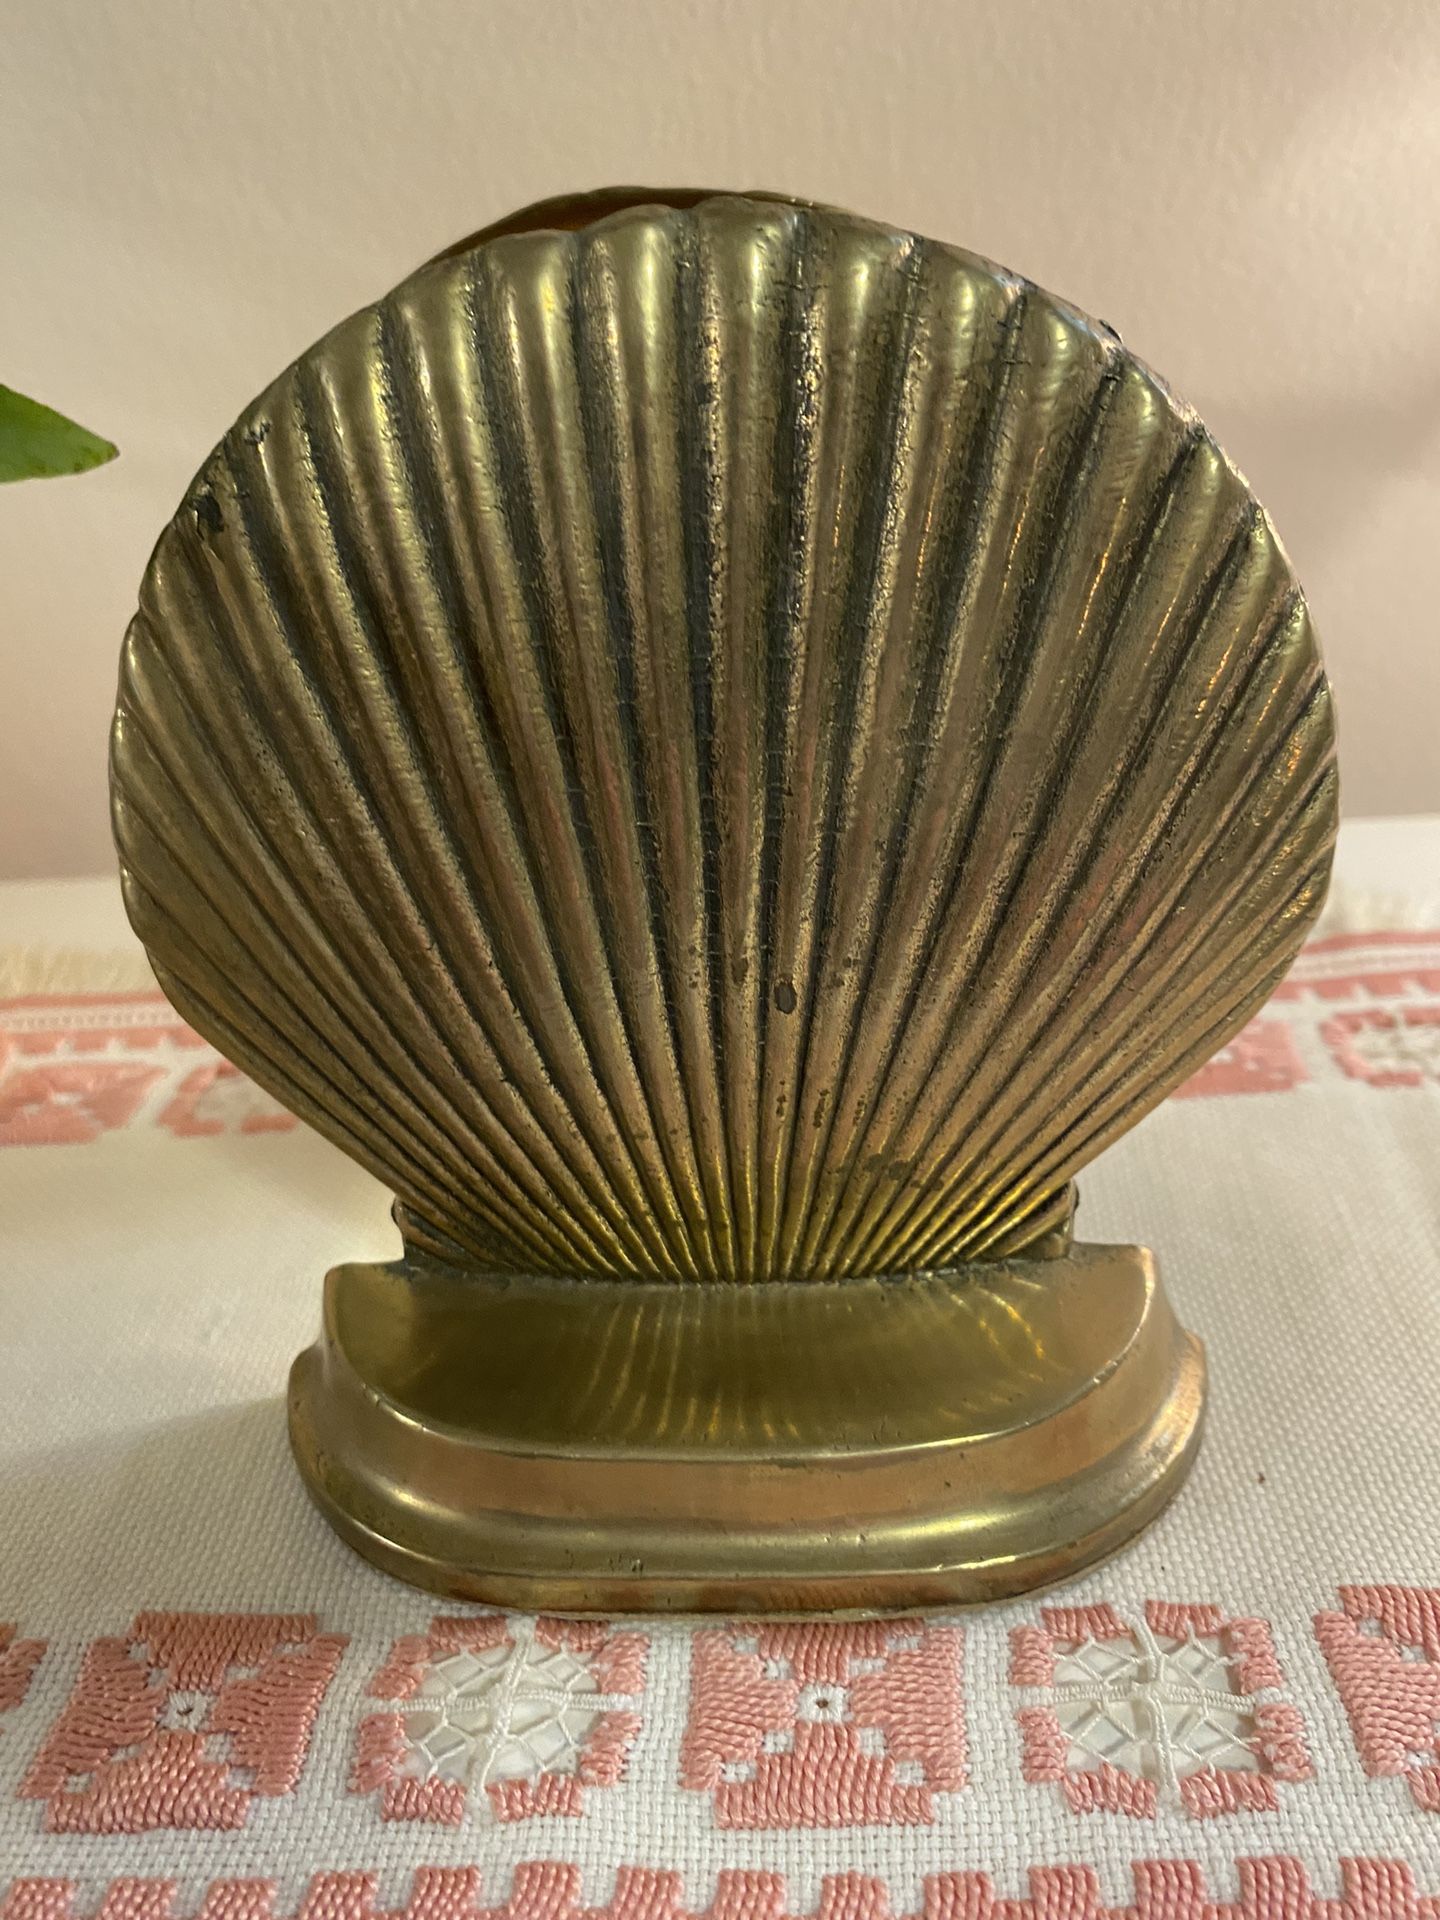 Vintage Brass Shell Bookends